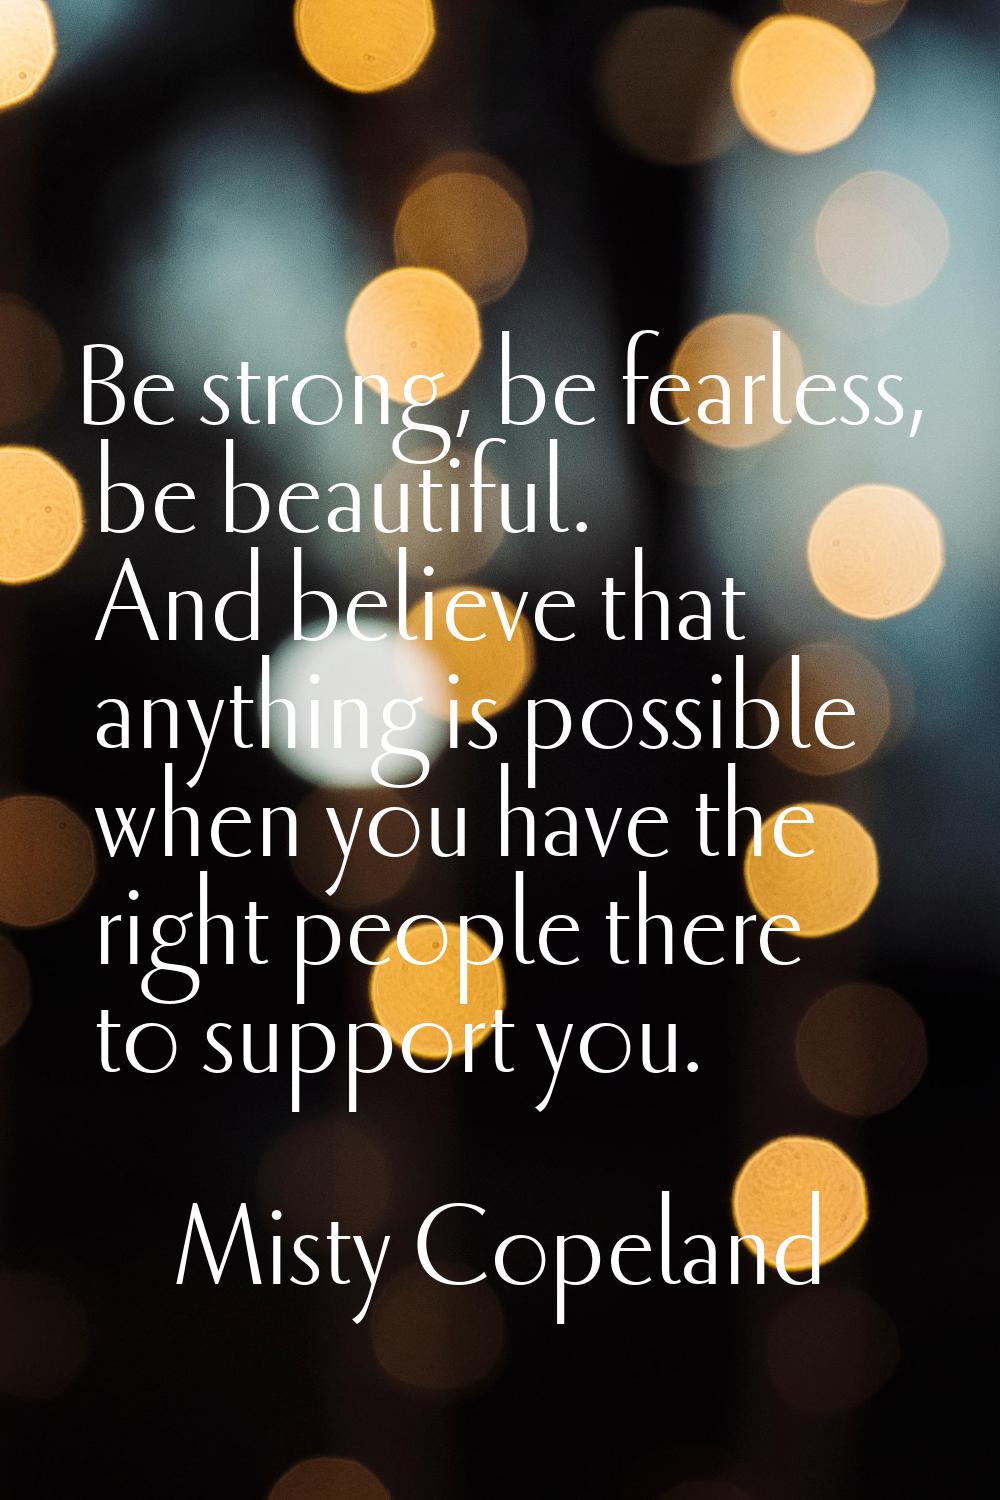 Be strong, be fearless, be beautiful. And believe that anything is possible when you have the right